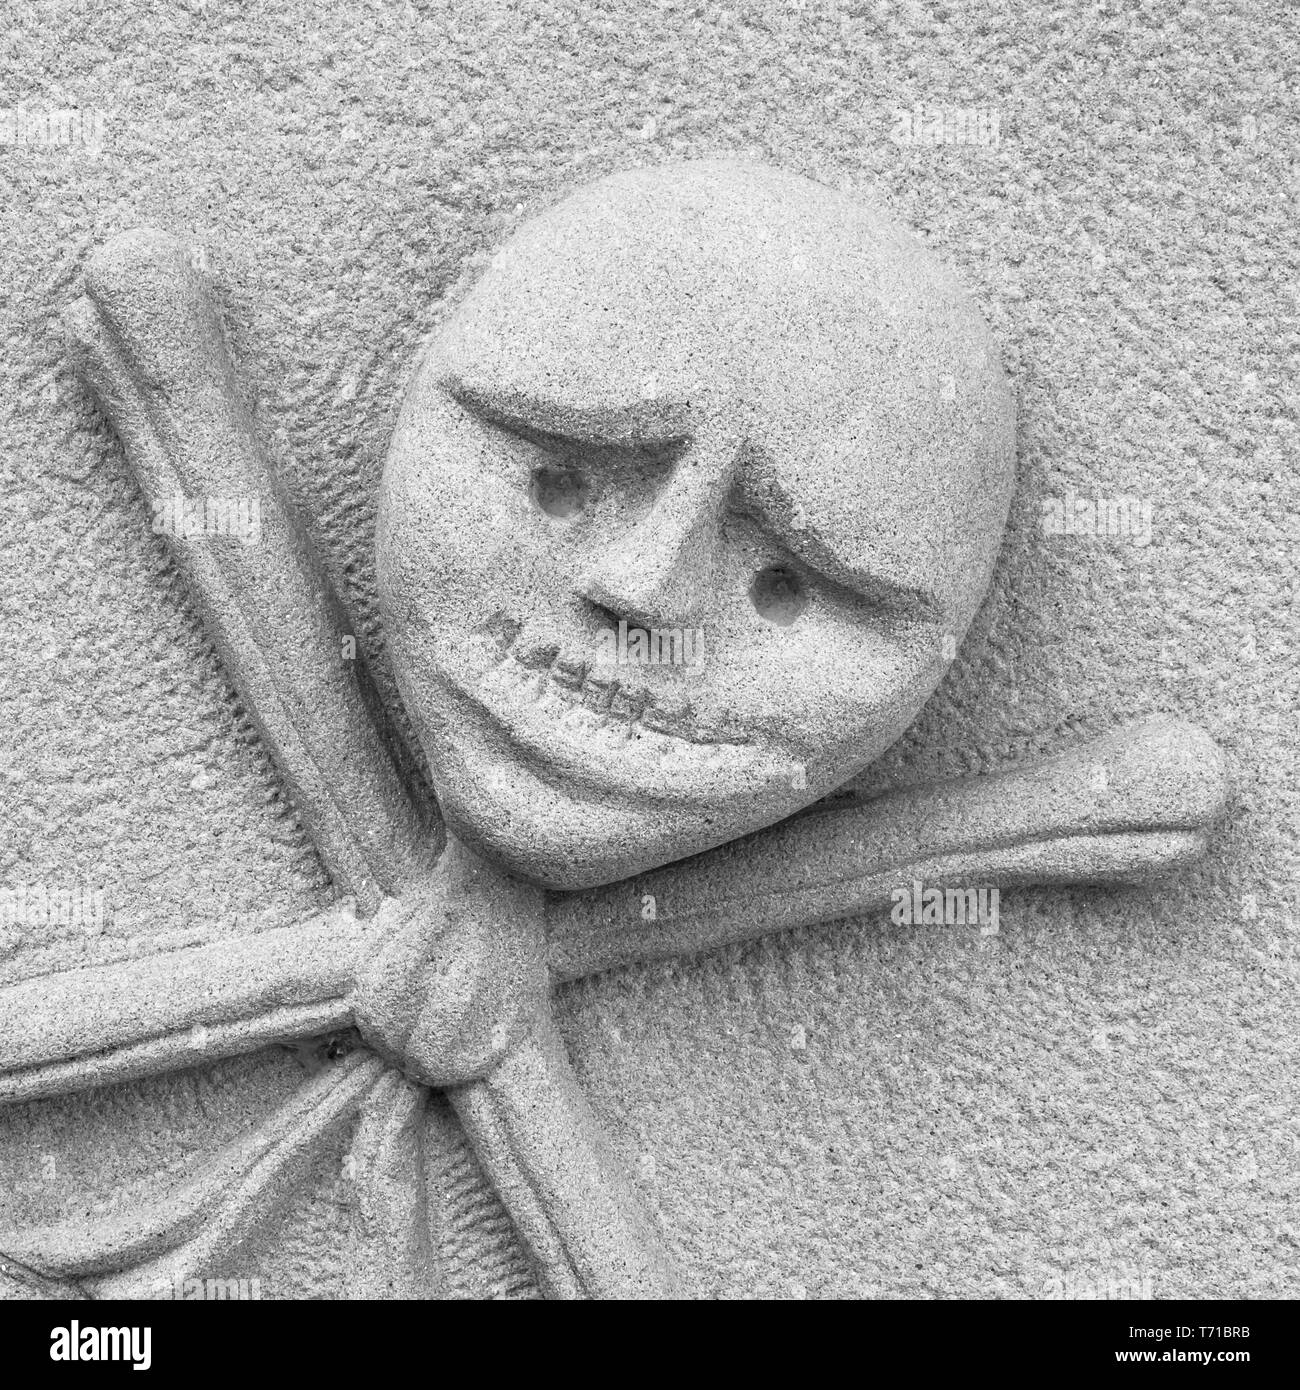 Stone sculpture of the skull with crossbones Stock Photo